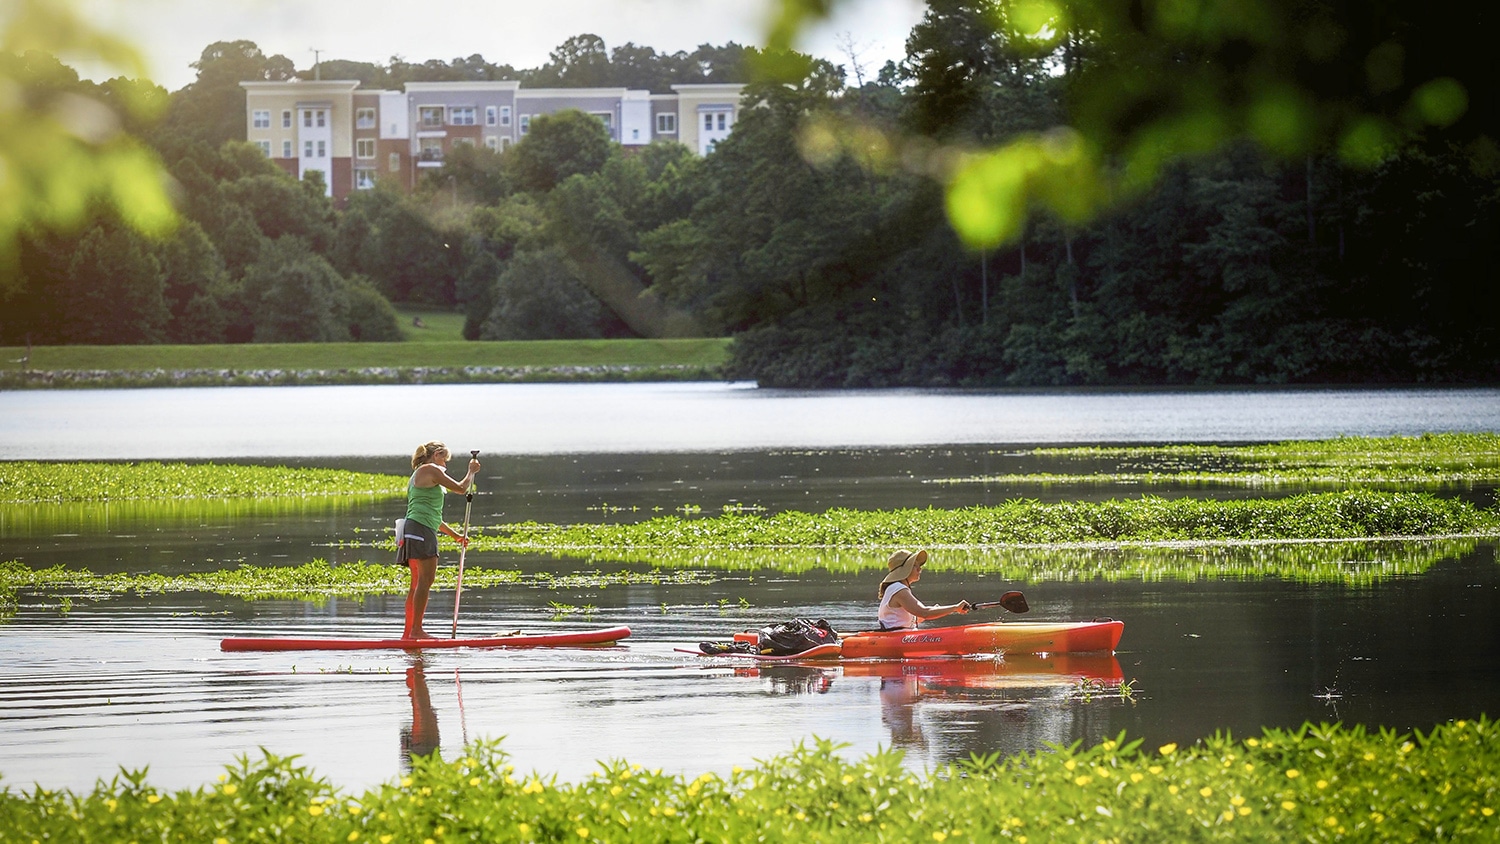 A person in a kayak and a person on a stand-up paddle board paddle across Lake Raleigh with trees and buildings in the background.